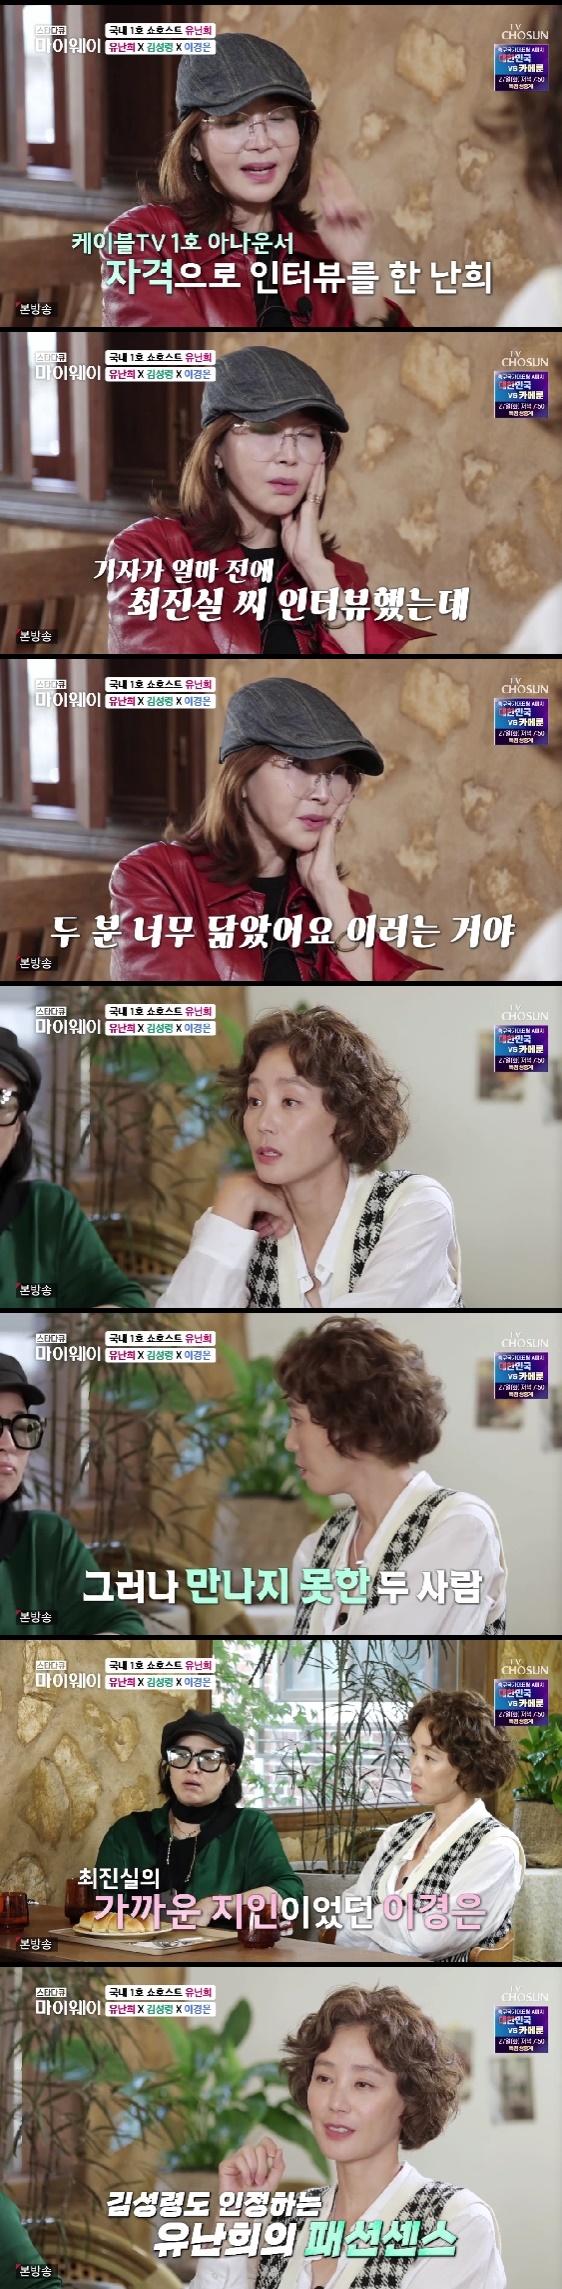 star documentary myway yu nan-hee mentioned the late Choi Jin-sil.On the 25th TV CHOSUN star documentary myway, South Korea 1st show host Yu nan-hee appeared and released the family and house for the first time from the history of announcer 22.Yu nan-hee became the nations No. 1 show host in 1995, when he was in charge of the first home shopping broadcast in South Korea.In less than a year after opening, it achieved sales of 100 million won per hour. In 2012, it exceeded 100 million sales per minute for the first time in Home Shopping, and it was the first to record 100 million Salary records.After the freelance declaration, he continued to open the way for the first time and won the titles of first and best.Yu nan-hee met best friend actor Kim Sung-ryung and makeup artist Lee Kyung-eun.Kim Sung-ryung agreed, saying, My sister resembles a lot of truth.Photo: TV CHOSUN broadcast screen